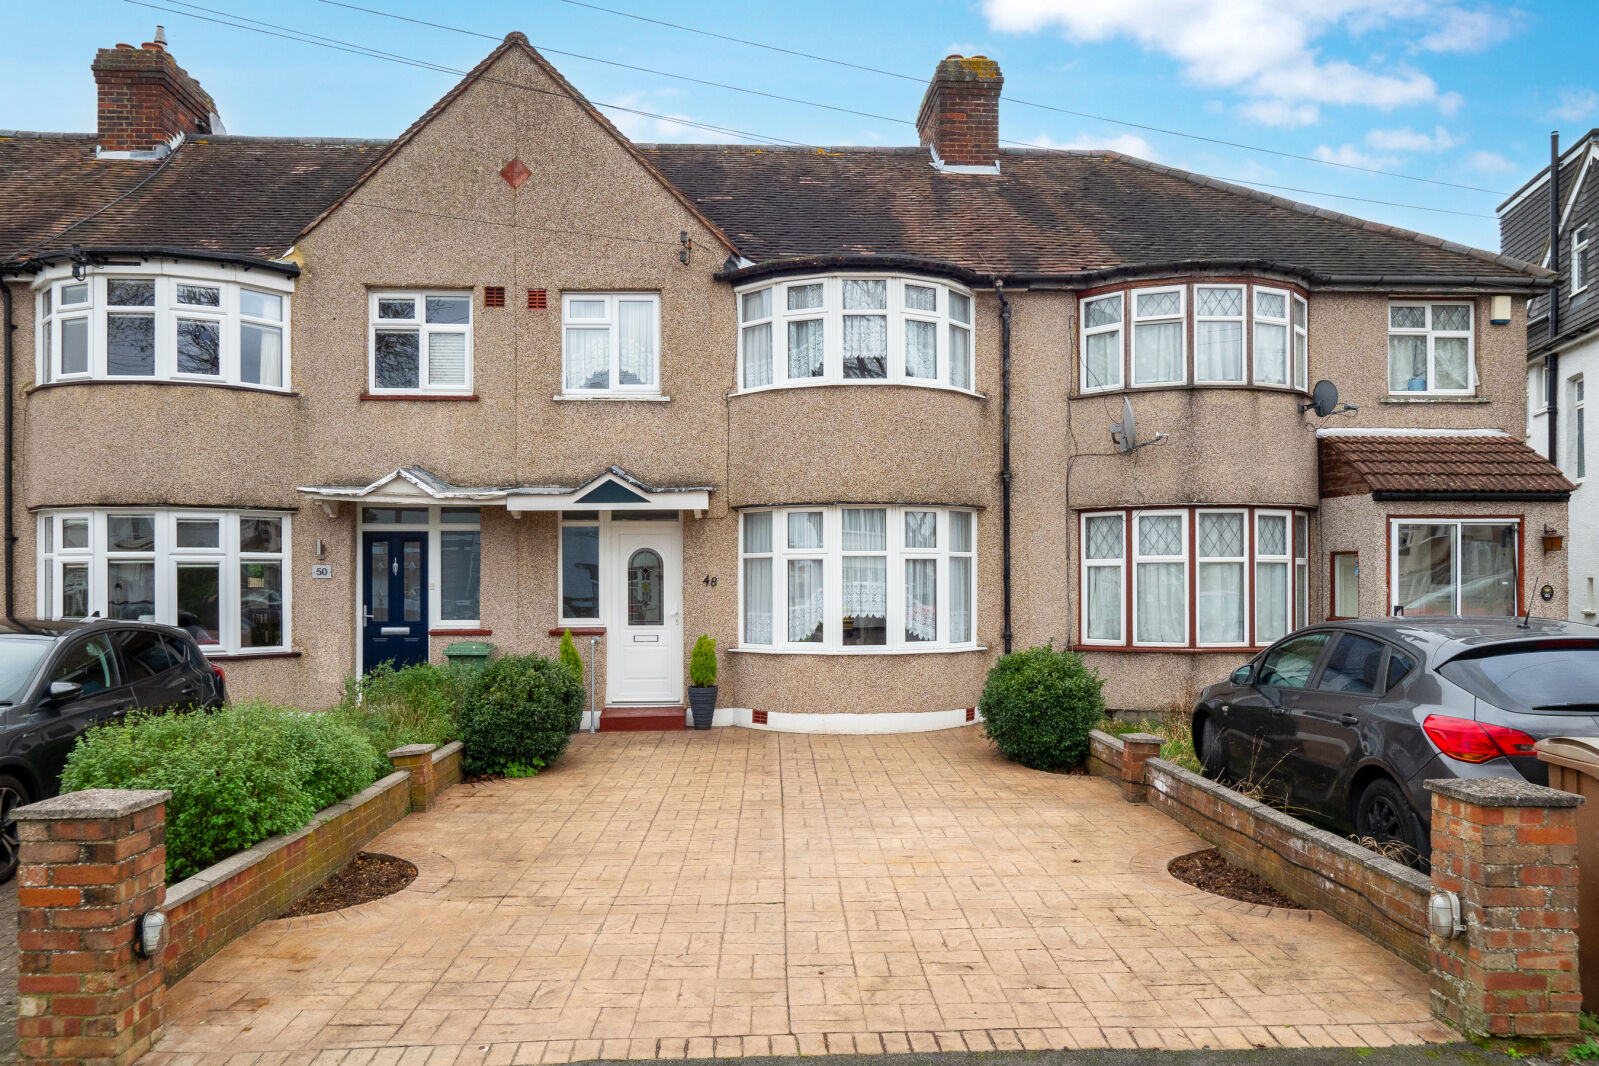 3 bedroom mid terraced house for sale Kew Crescent, Cheam, SM3, main image